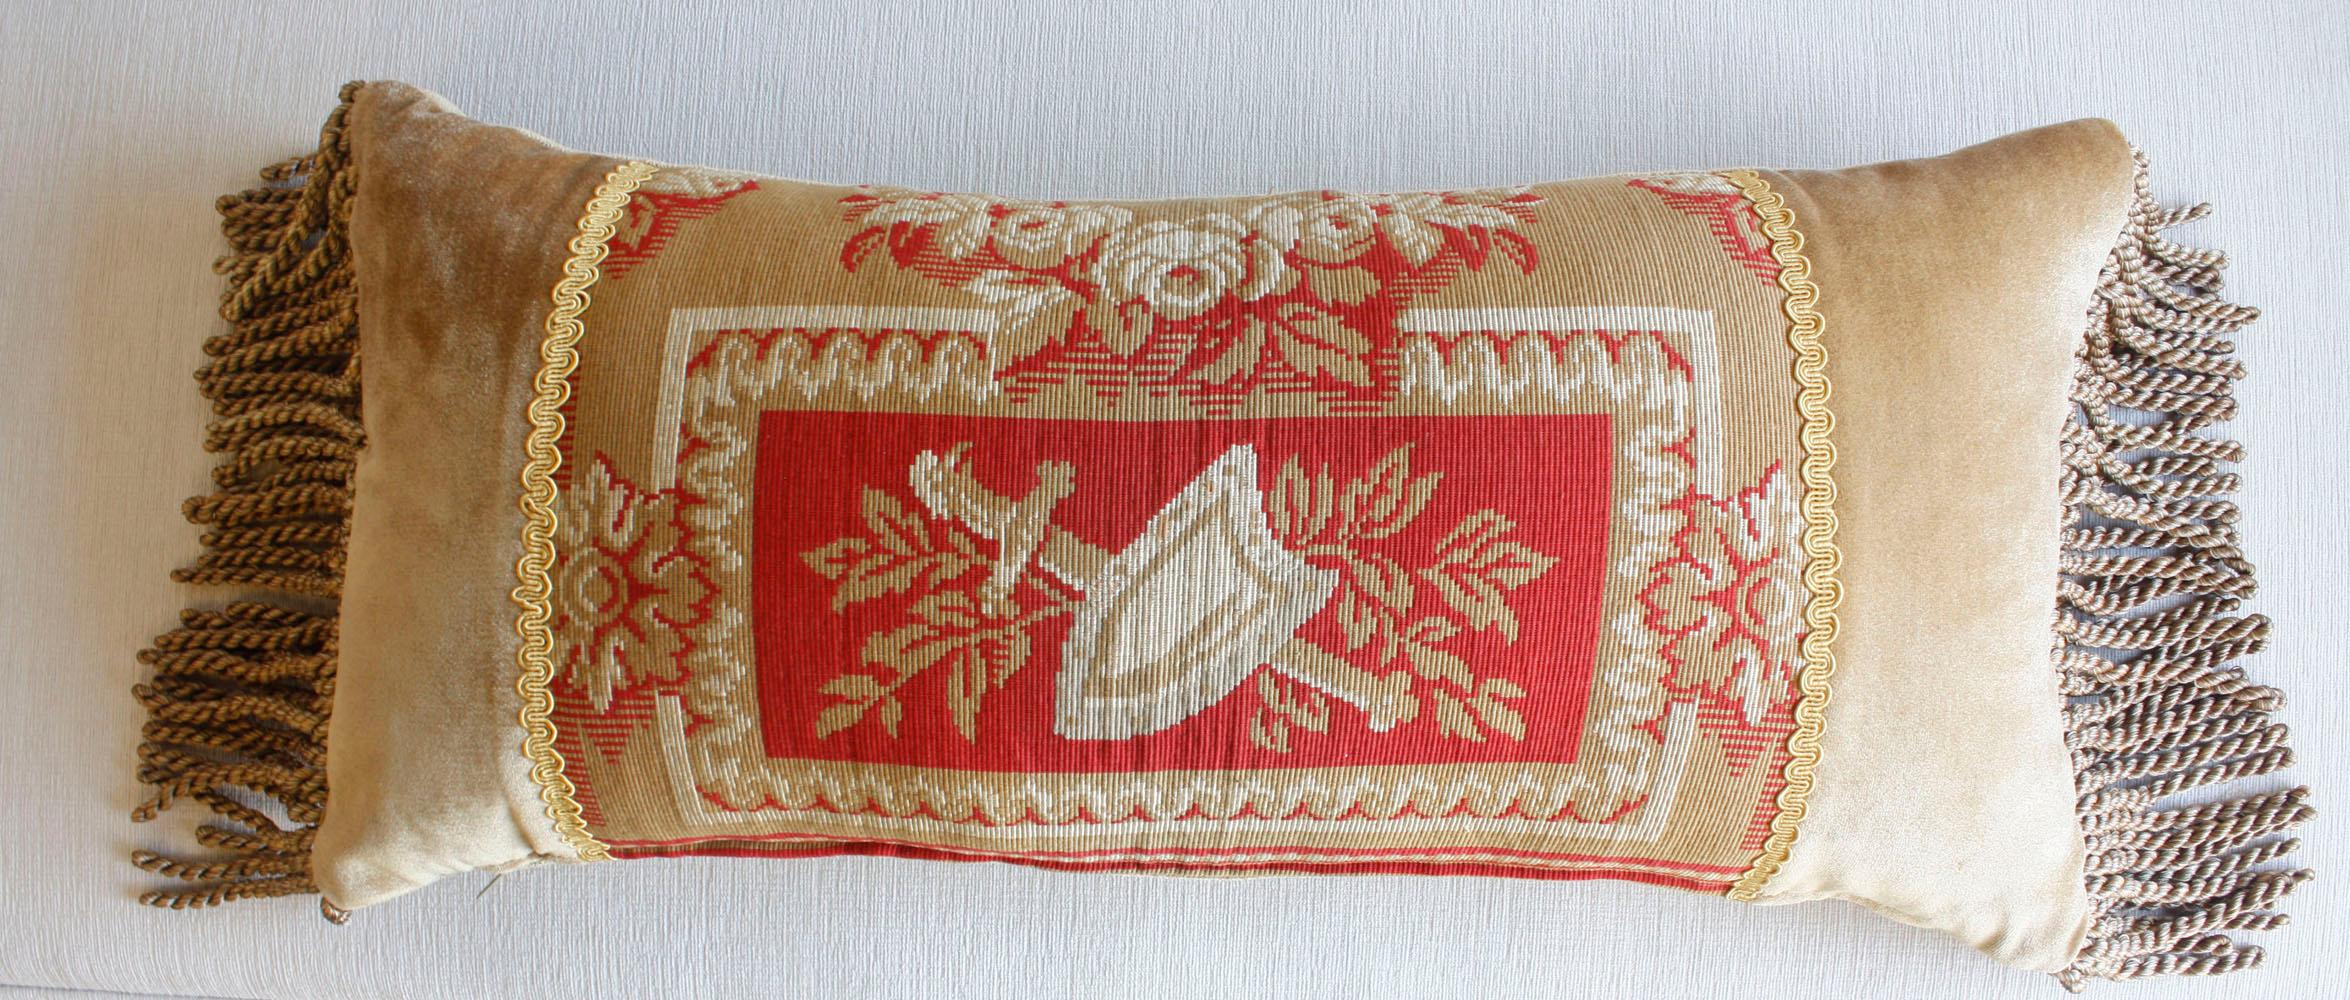 Early 20th Century Neoclassical-Style Tapestry Pillows with Shield and Sword Design